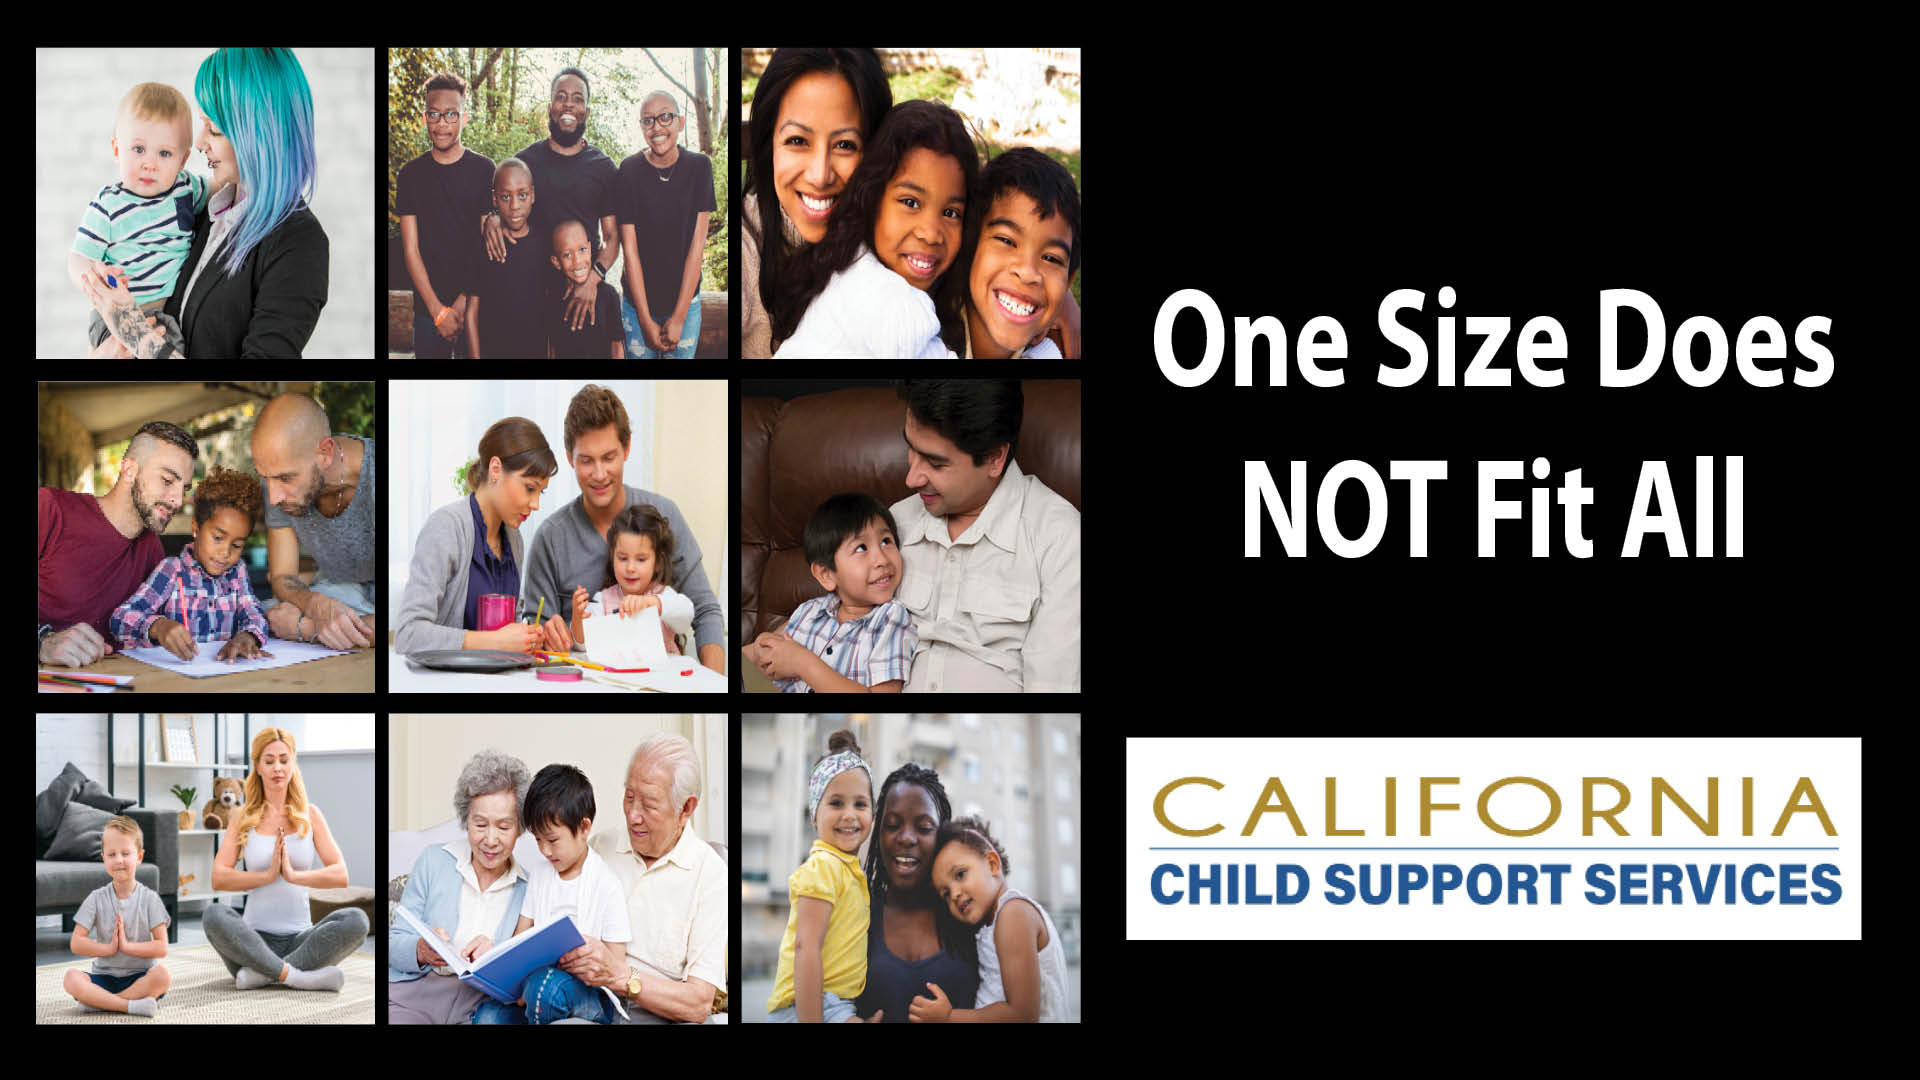 Child support awareness month 2020. Families have changes alot, so has child support.